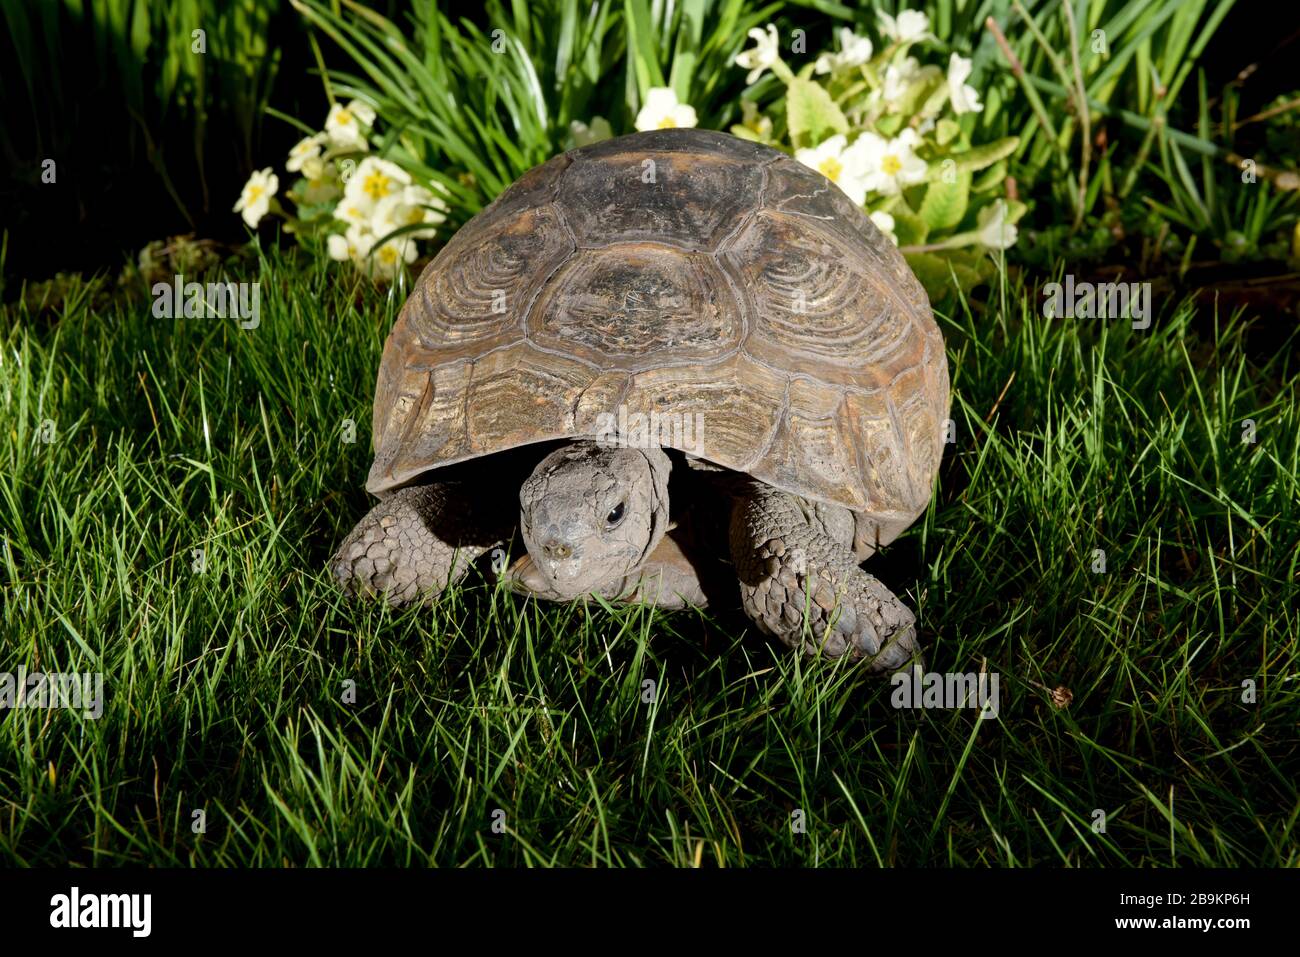 Telford, Shropshire, Uk. March 24th 2020 While people in the Uk are are going into lockdown and self isolation this old lady is doing the opposite, Freda the tortoise is well over 100 years old and has just woken up after self hibernating for six months in the garden she has lived in for 50 years. She always buries herself underground in late October and wakes in late March providing the weather is sunny. Credit: David Bagnall/Alamy Live News Stock Photo